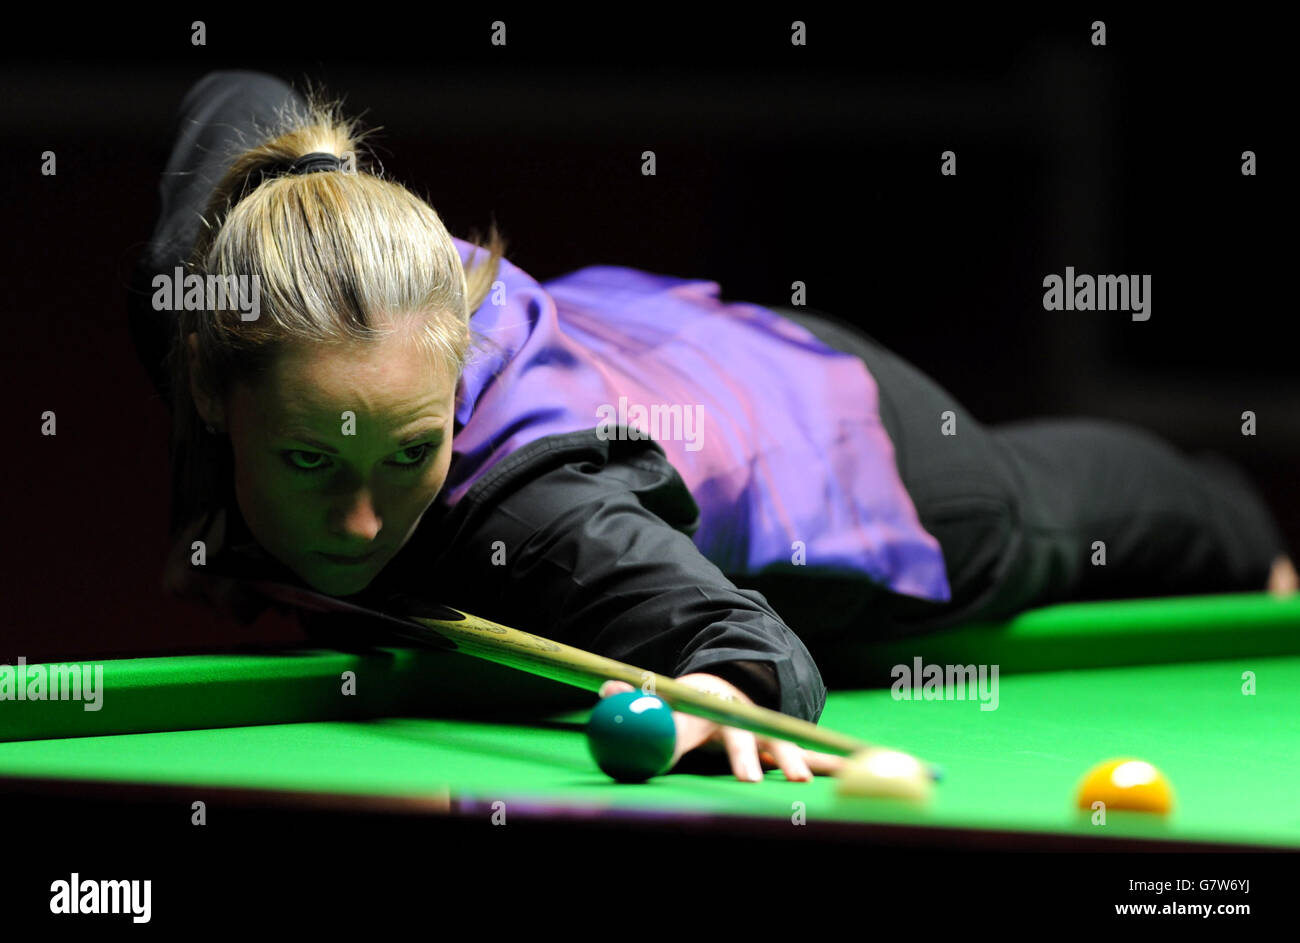 Reanne Evans plays a shot during her match against Ken Doherty during the World Championship Qualifying at Ponds Forge, Sheffield. PRESS ASSOCIATION Photo. Picture date: Thursday April 9, 2015. Photo credit should read: Tim Goode/PA Wire Stock Photo